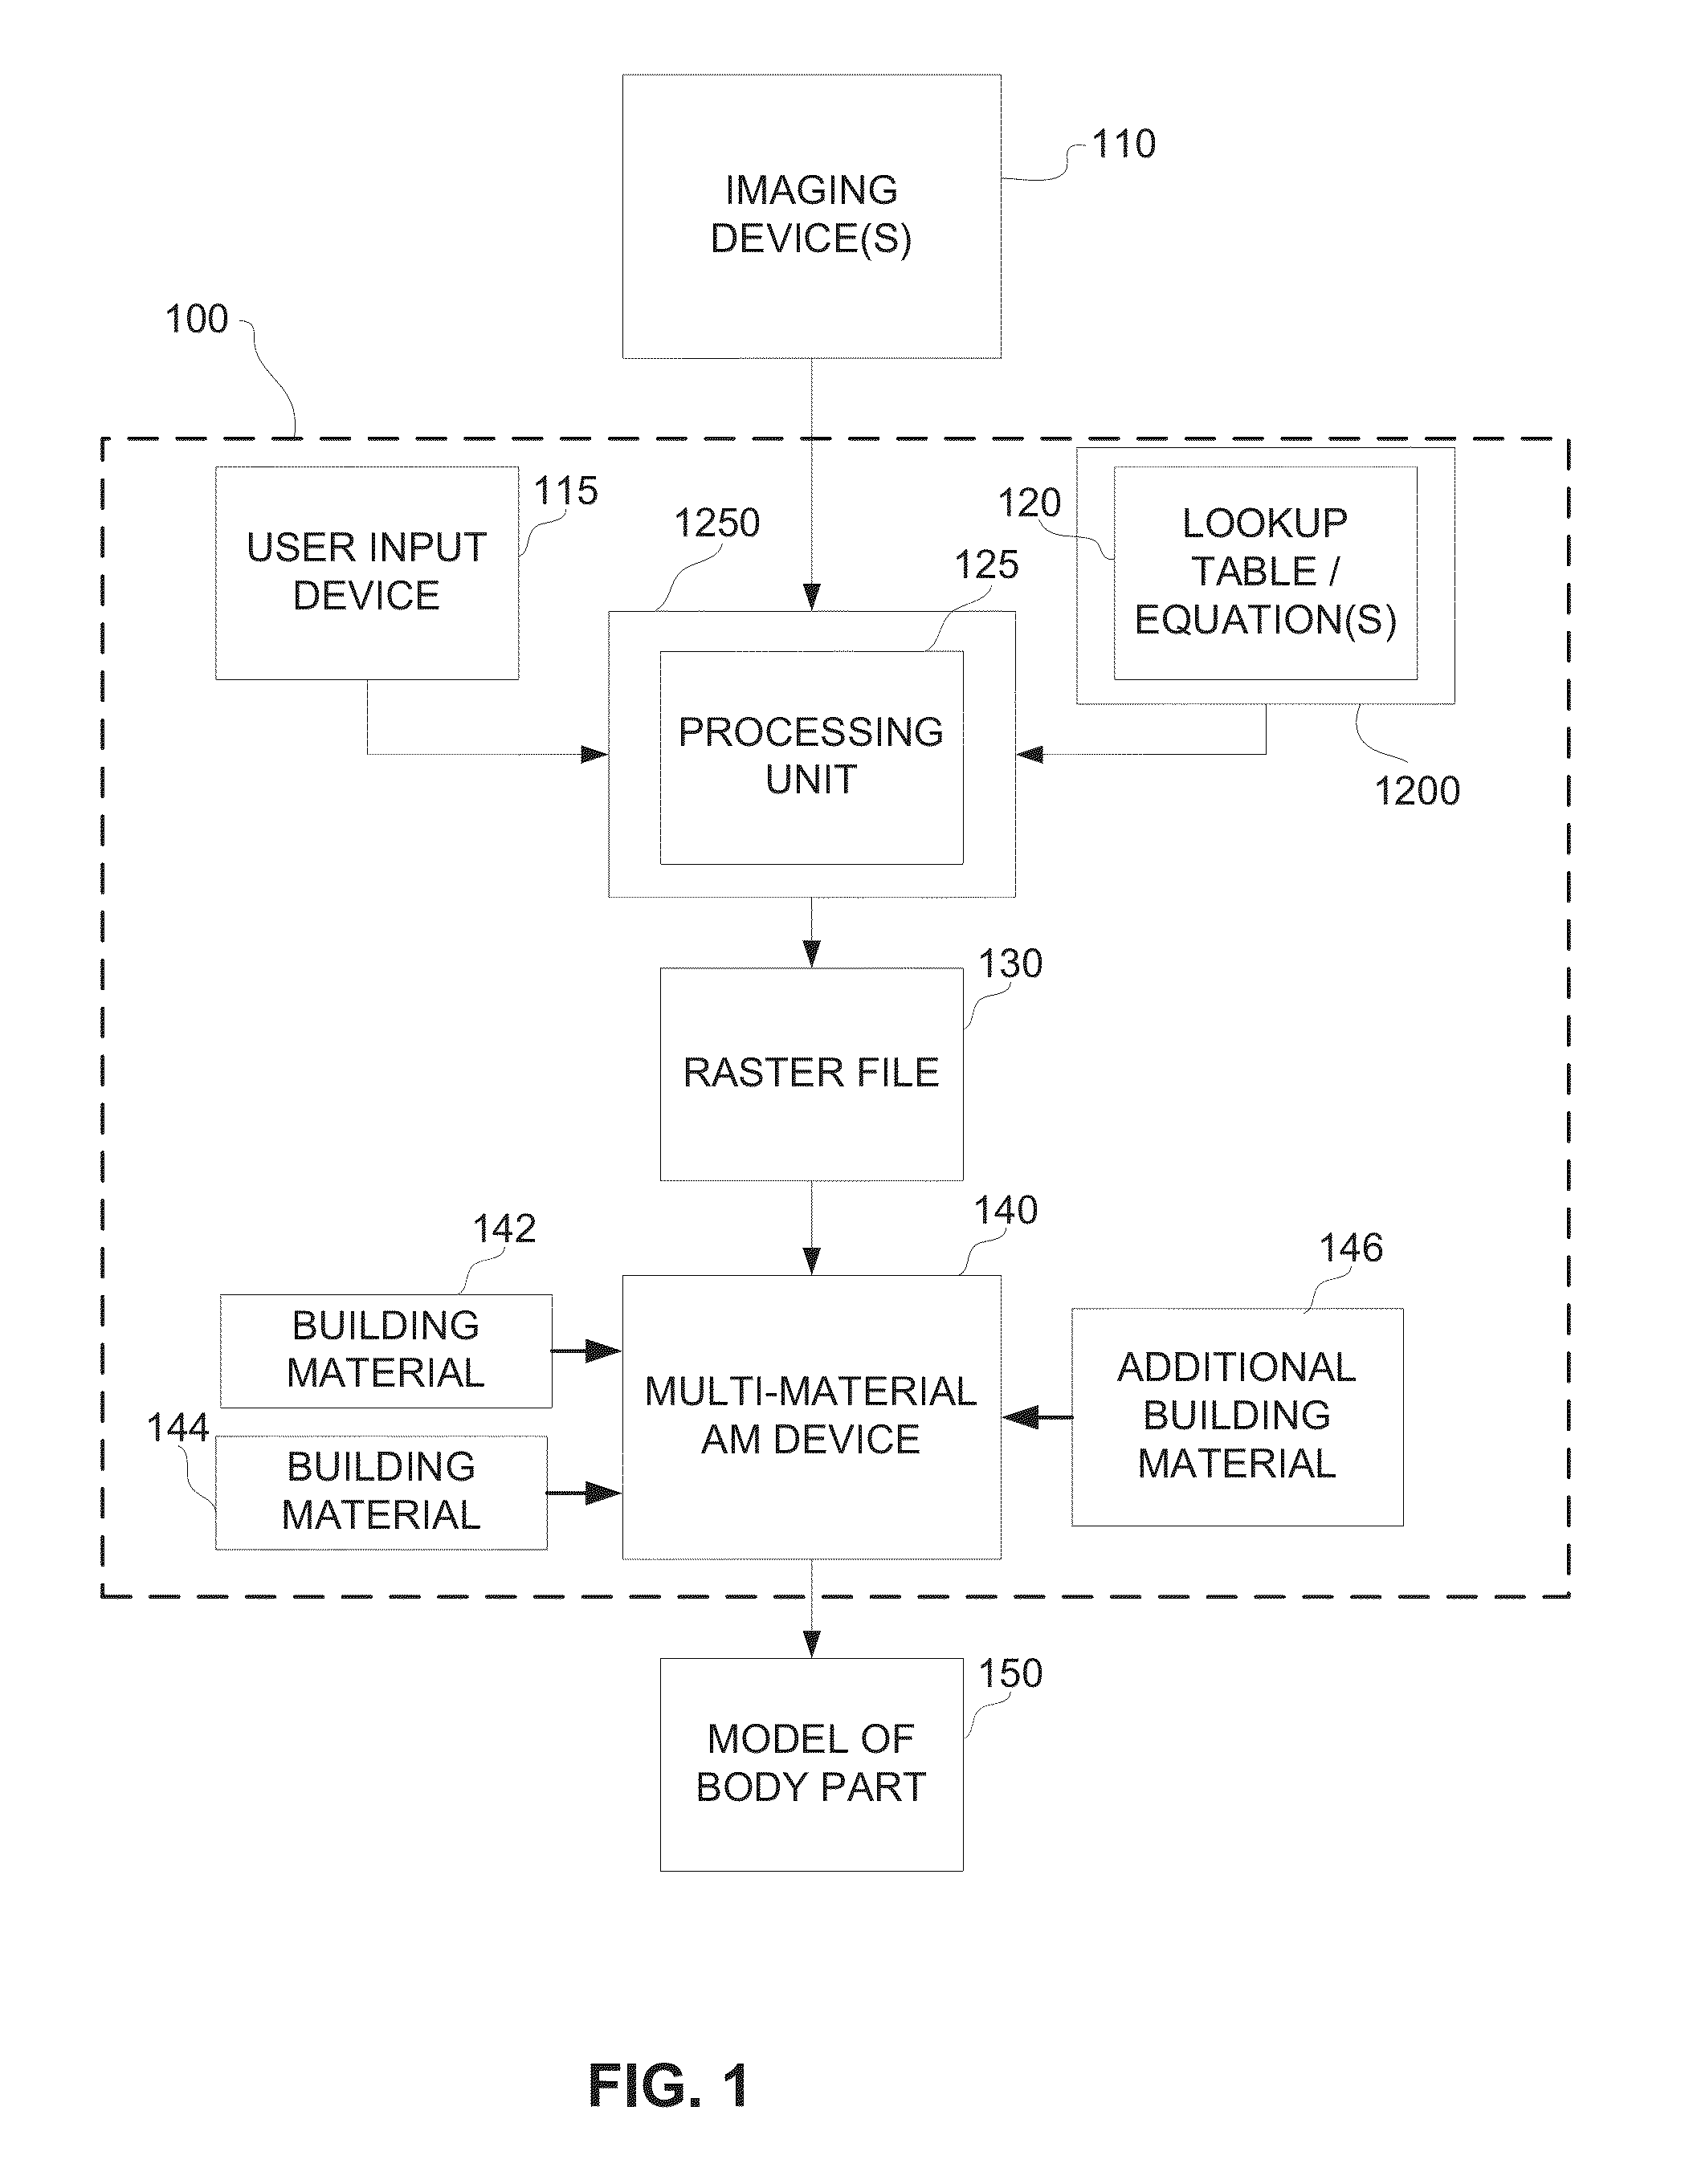 System and method for fabricating a body part model using multi-material additive manufacturing